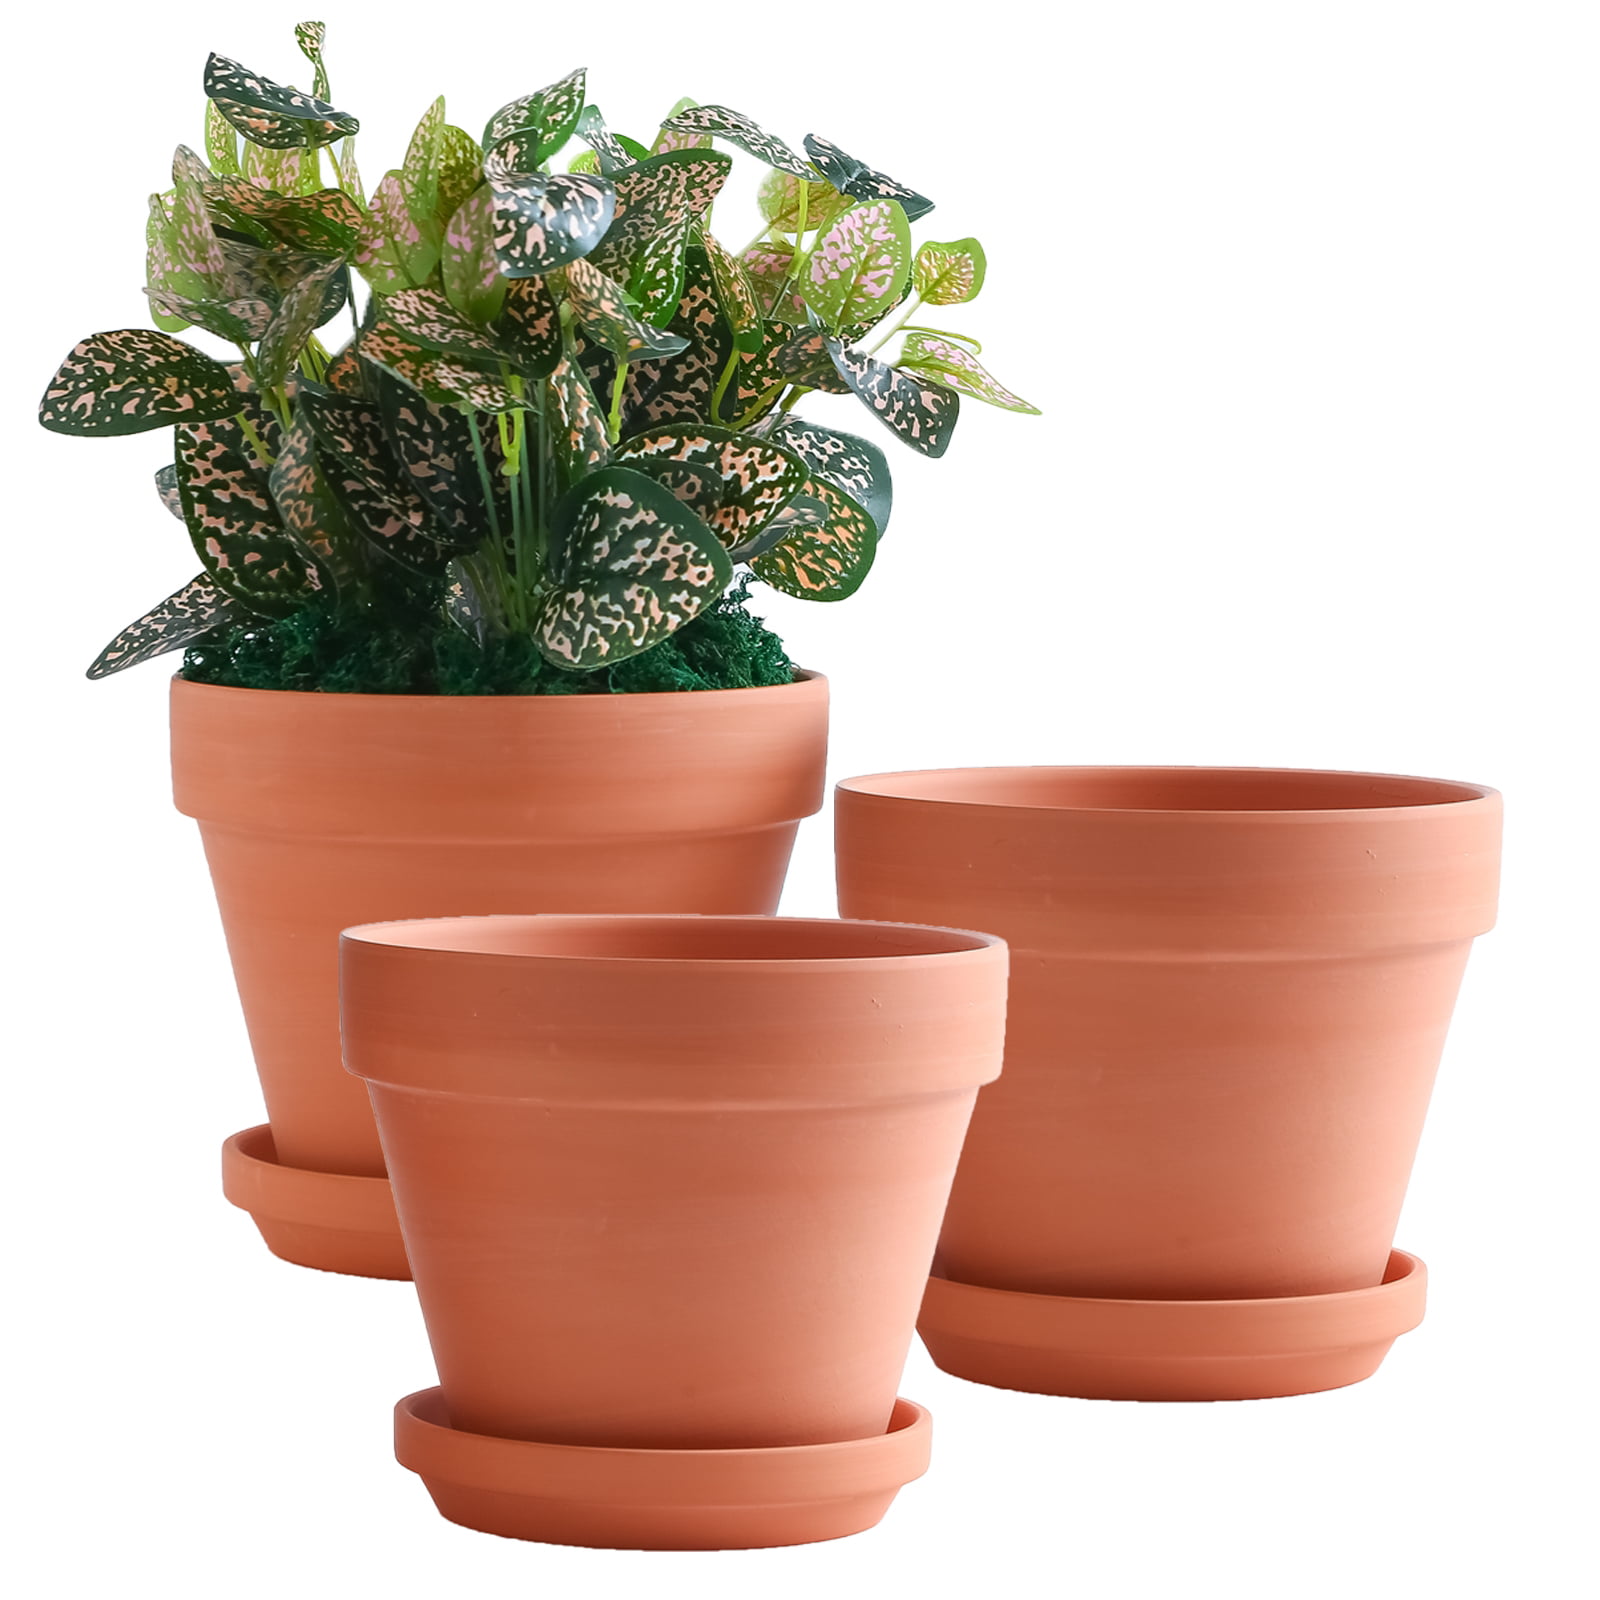 Large Terra Cotta Pots with Saucer 4 Pack Large 6'' Terra Cotta Plant Pot with 